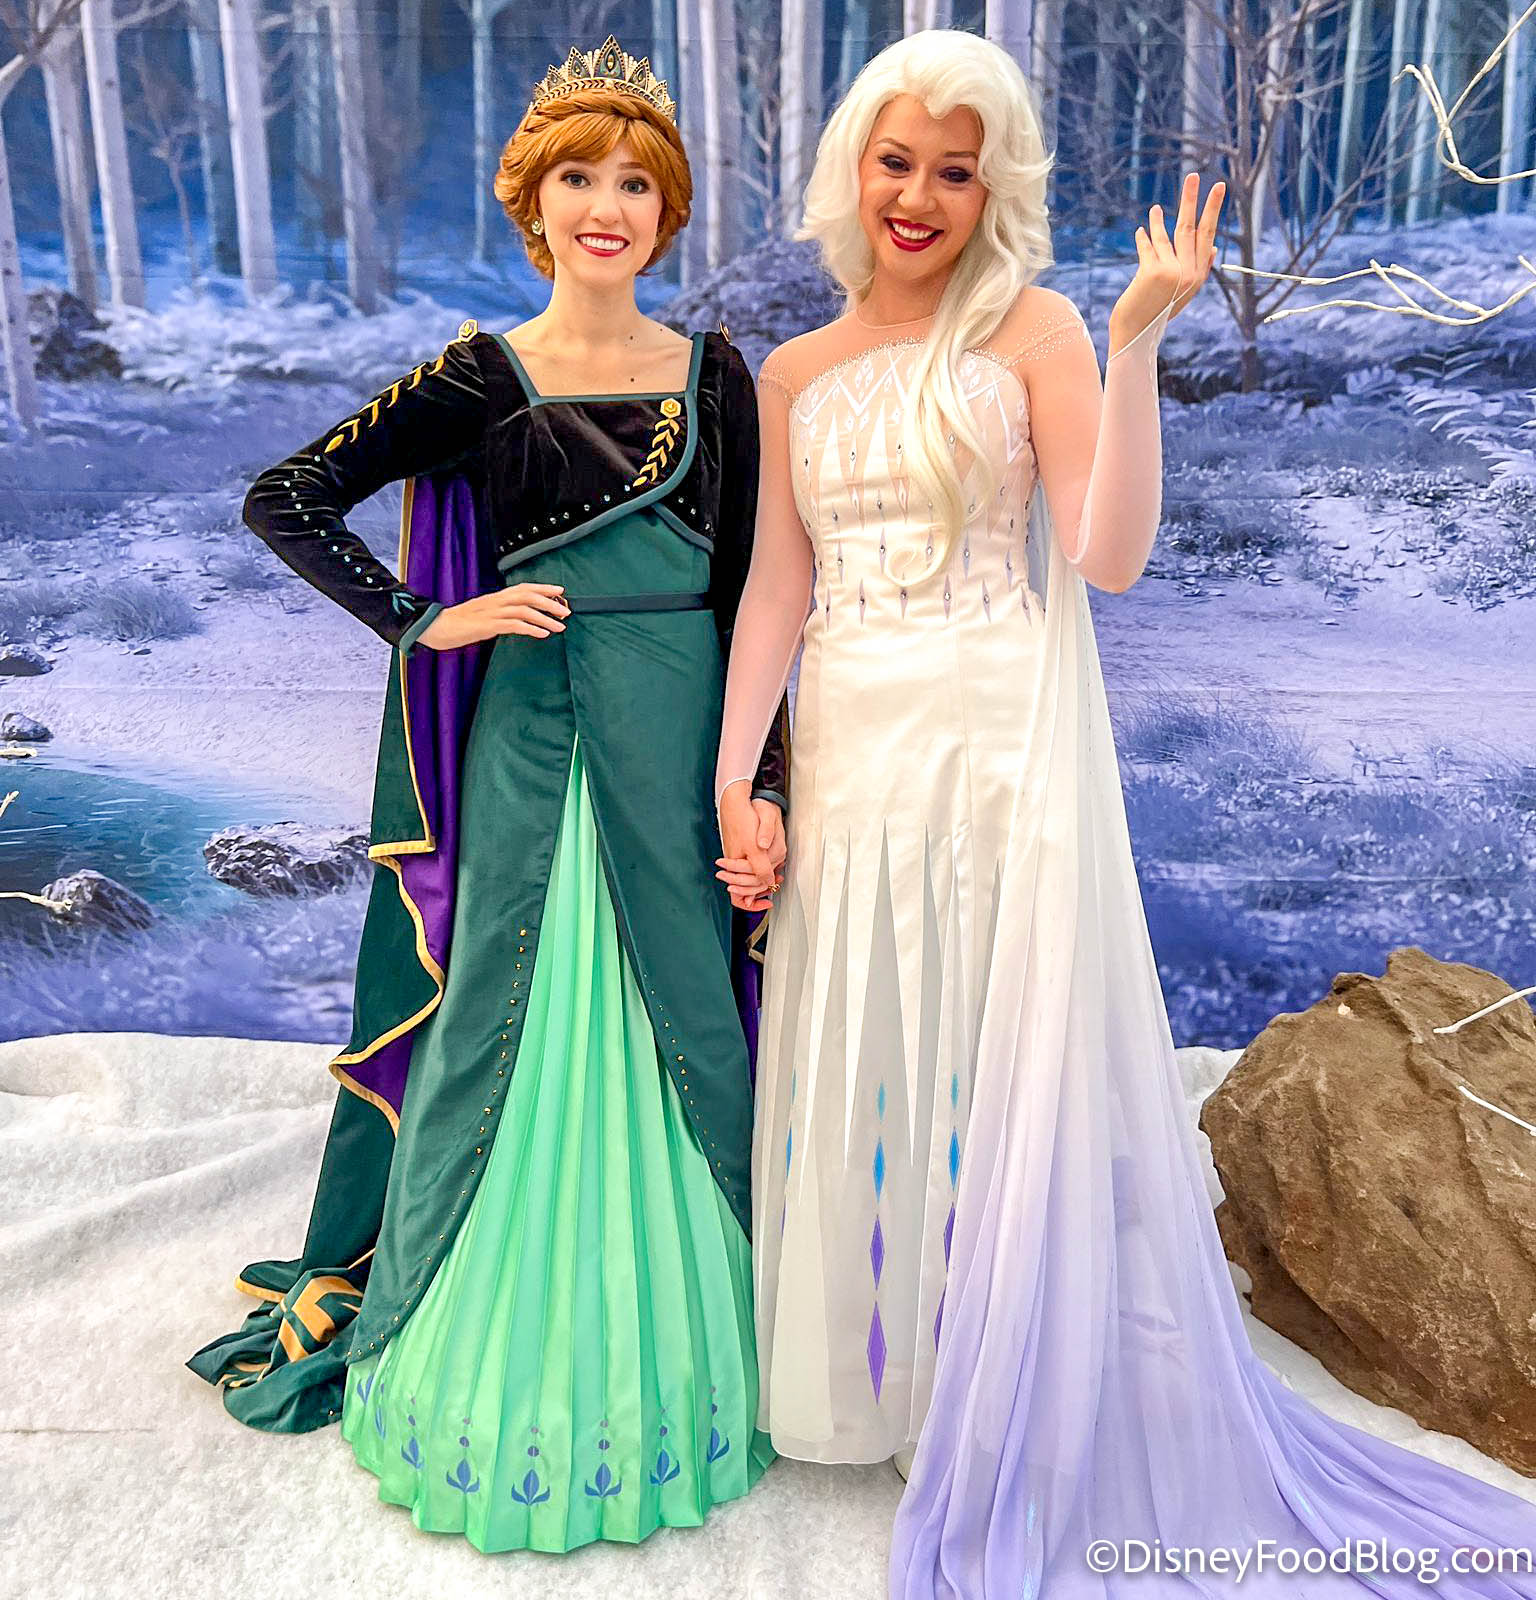 Frozen 3: Confirmation, Cast, Story & Everything We Know